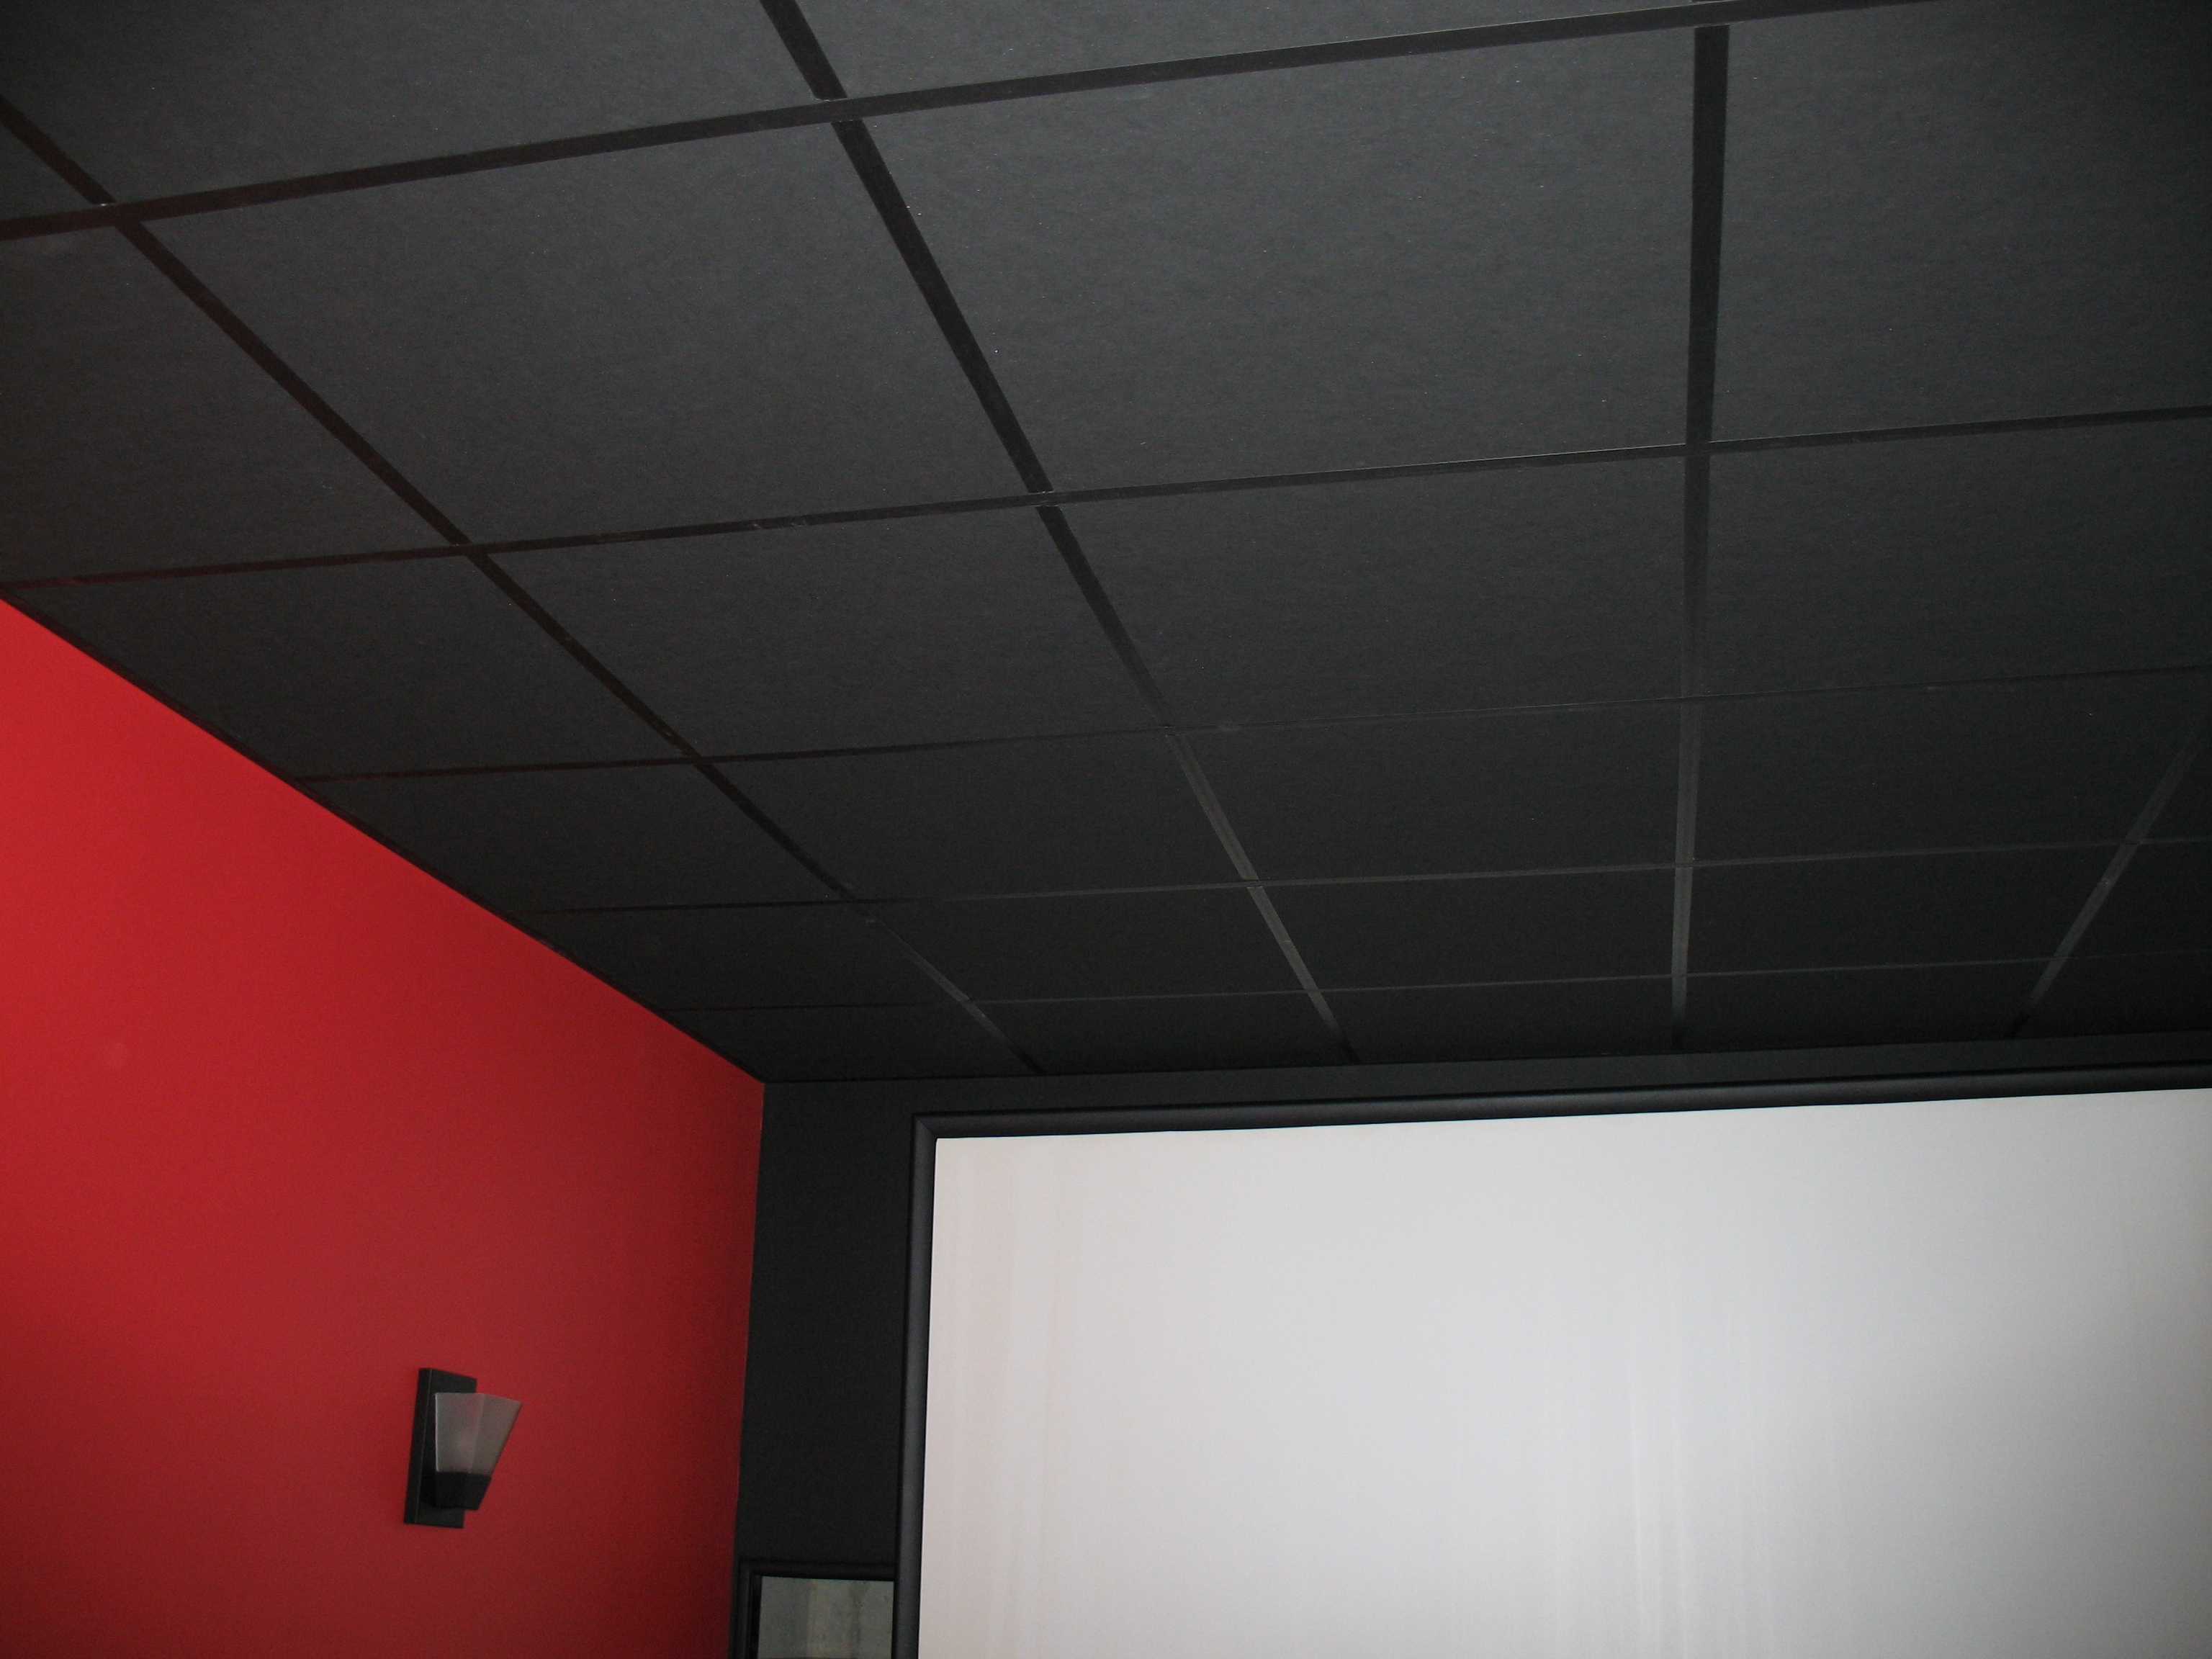 Soundproof Suspended Ceiling Tiles